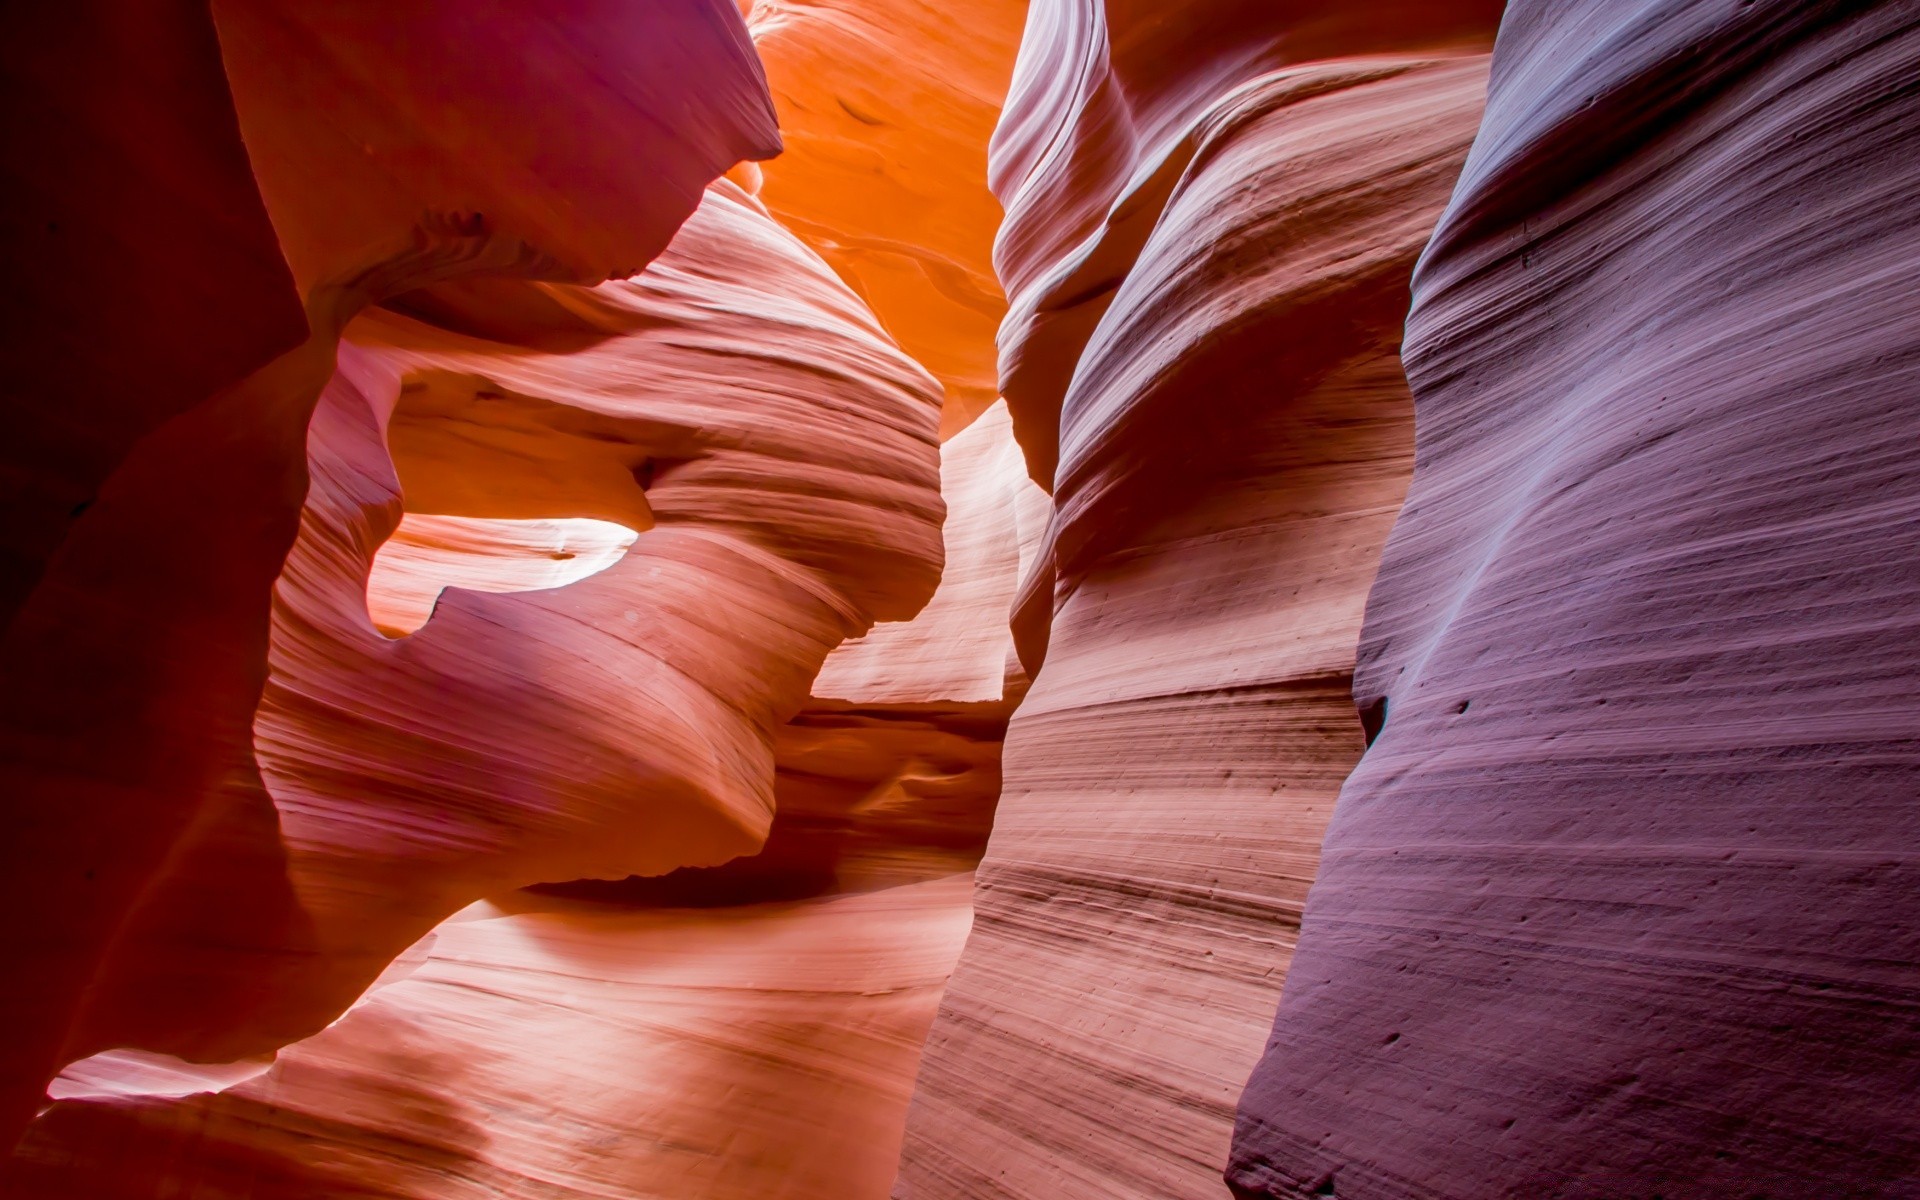 america antelope canyon page sandstone color art abstract desert nature outdoors dawn park travel slot blur landscape